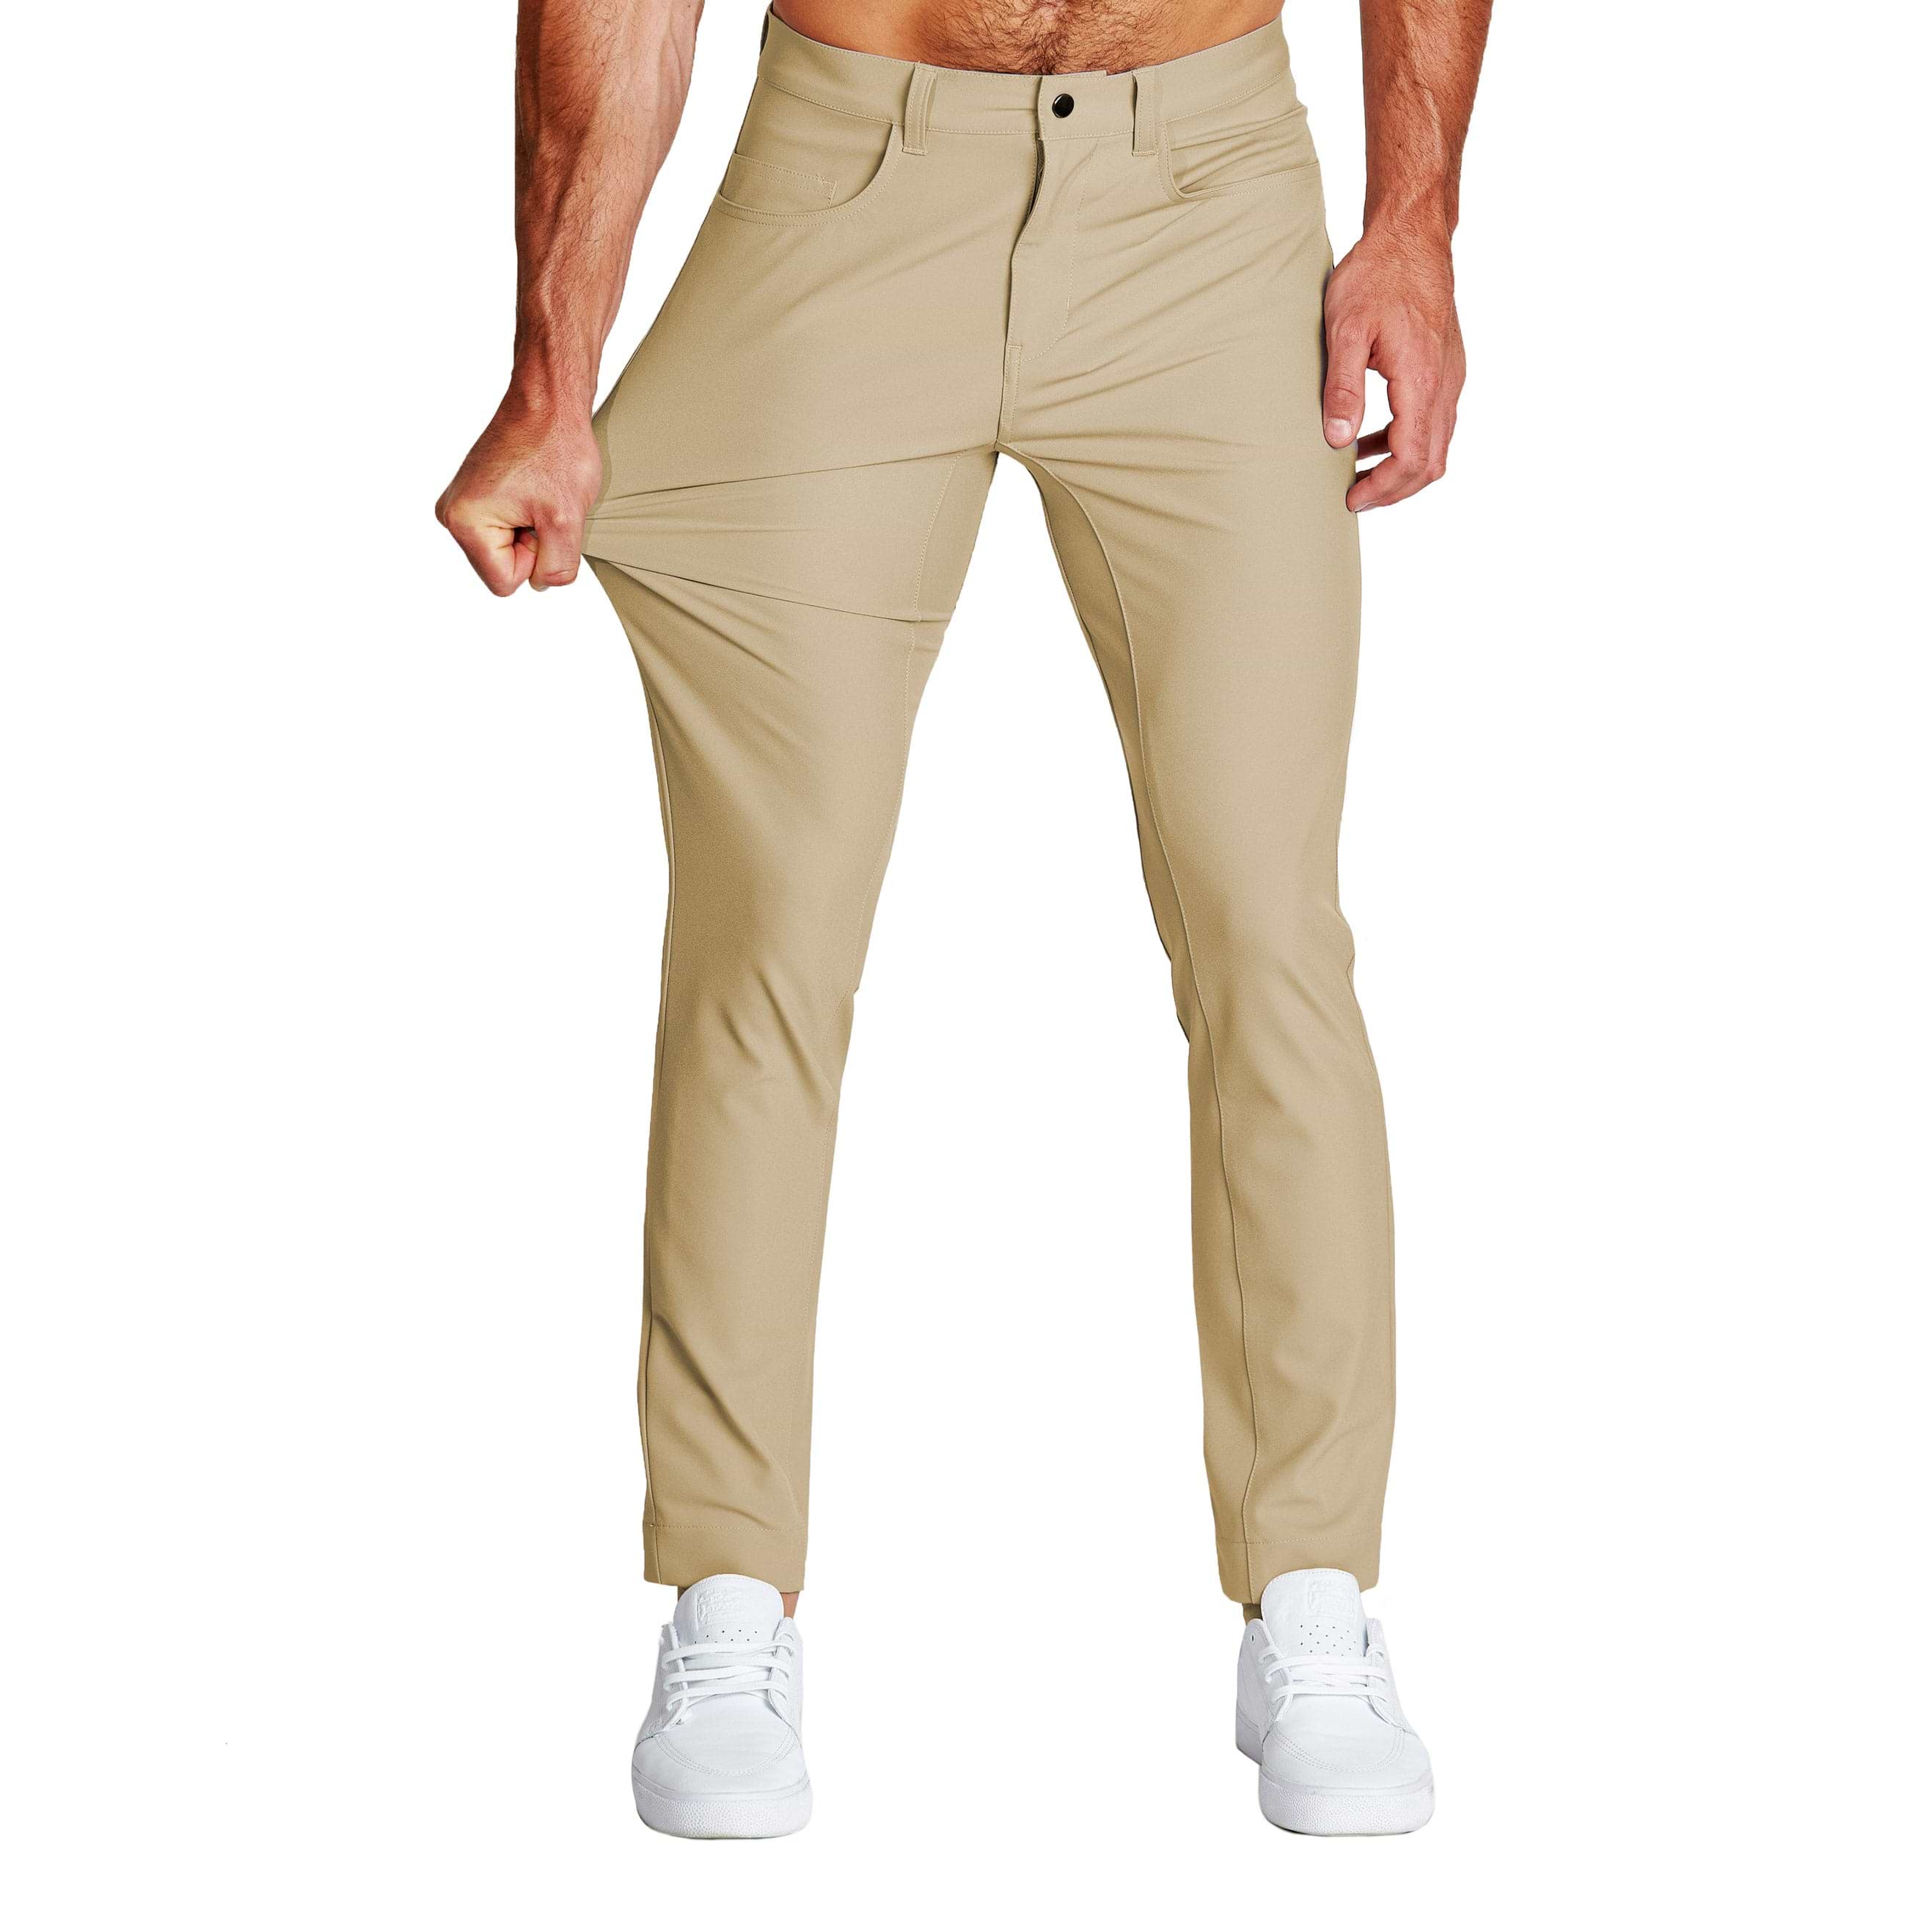 Shop for 4 Way Stretch Solid Comfort Pants for men Online in India |  Cultsport